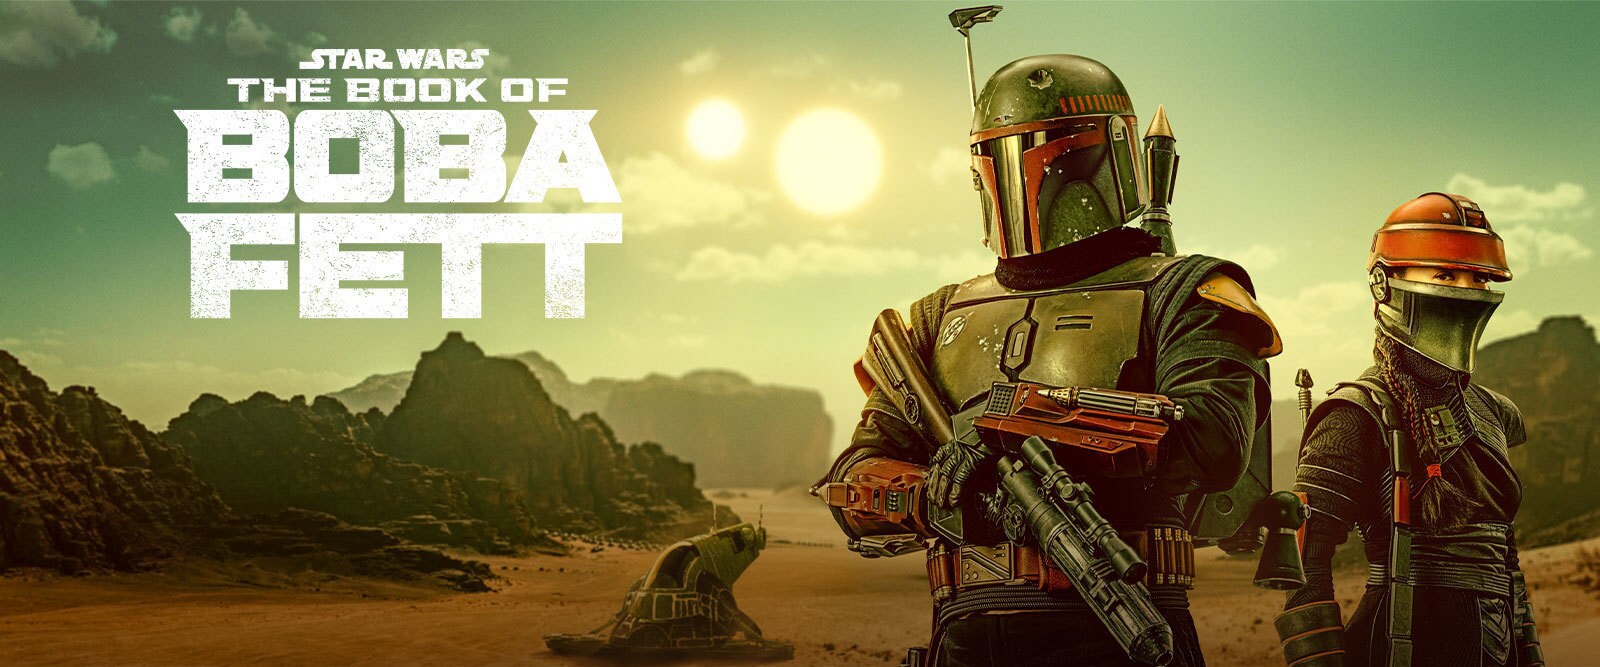 Star Wars Branded Page | The Book of Boba Fett